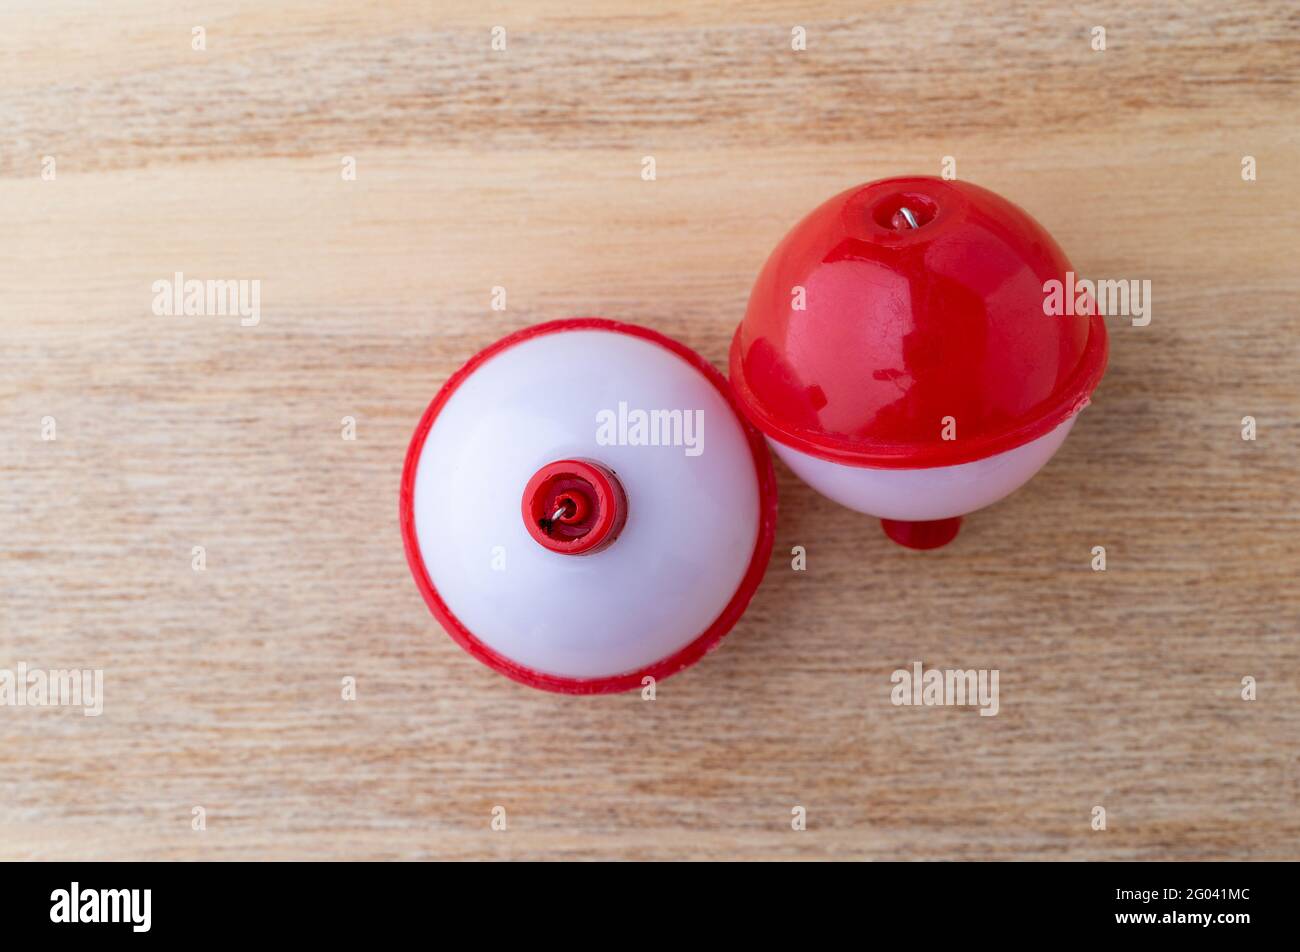 Top view of two red and white plastic fishing bobbers on a wood background  Stock Photo - Alamy